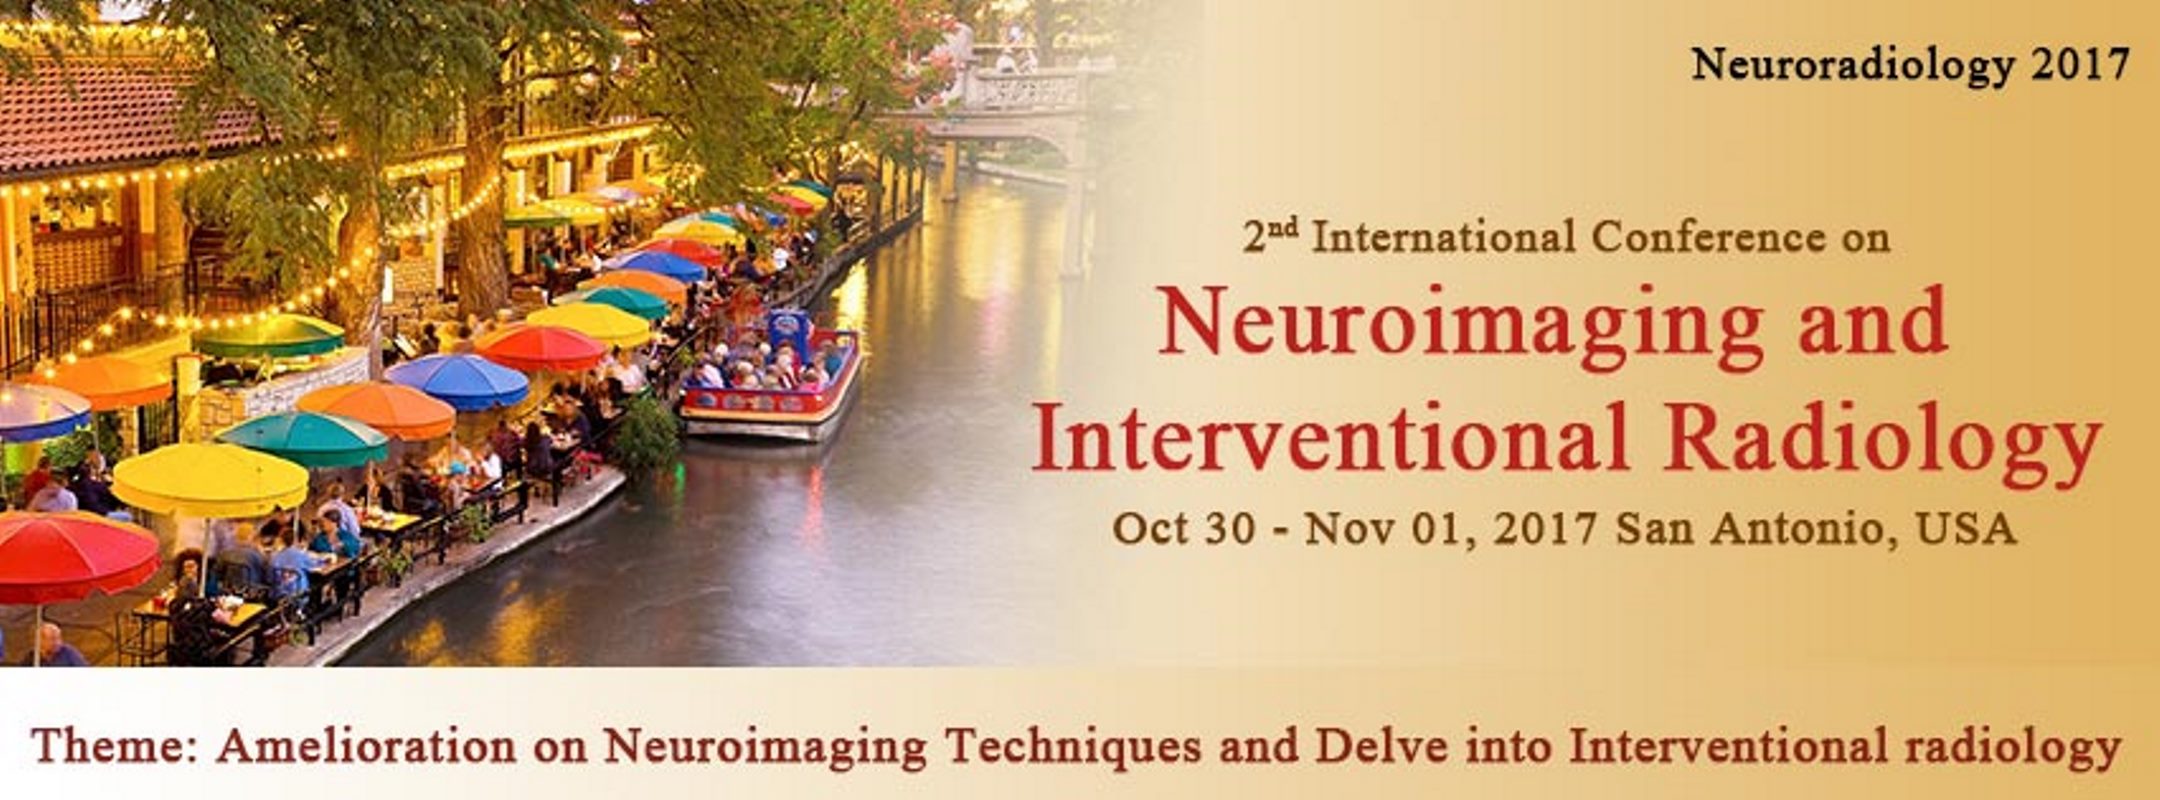 On behalf of the OCM (Organizing Committee members), it is with great delight that we invite you to the official site of 2nd International conference on Neuroimaging and Interventional Radiology during October 30 to November 1, 2017, San Antonio, USA. Neuroradiology2017 mainly spotlight on emerging field of neuroimaging and radiology in diagnosis and treatment. 

Neuroradiology 2017 has been planned and implemented in accordance with the accreditation requirements and policies of the Accreditation Committee